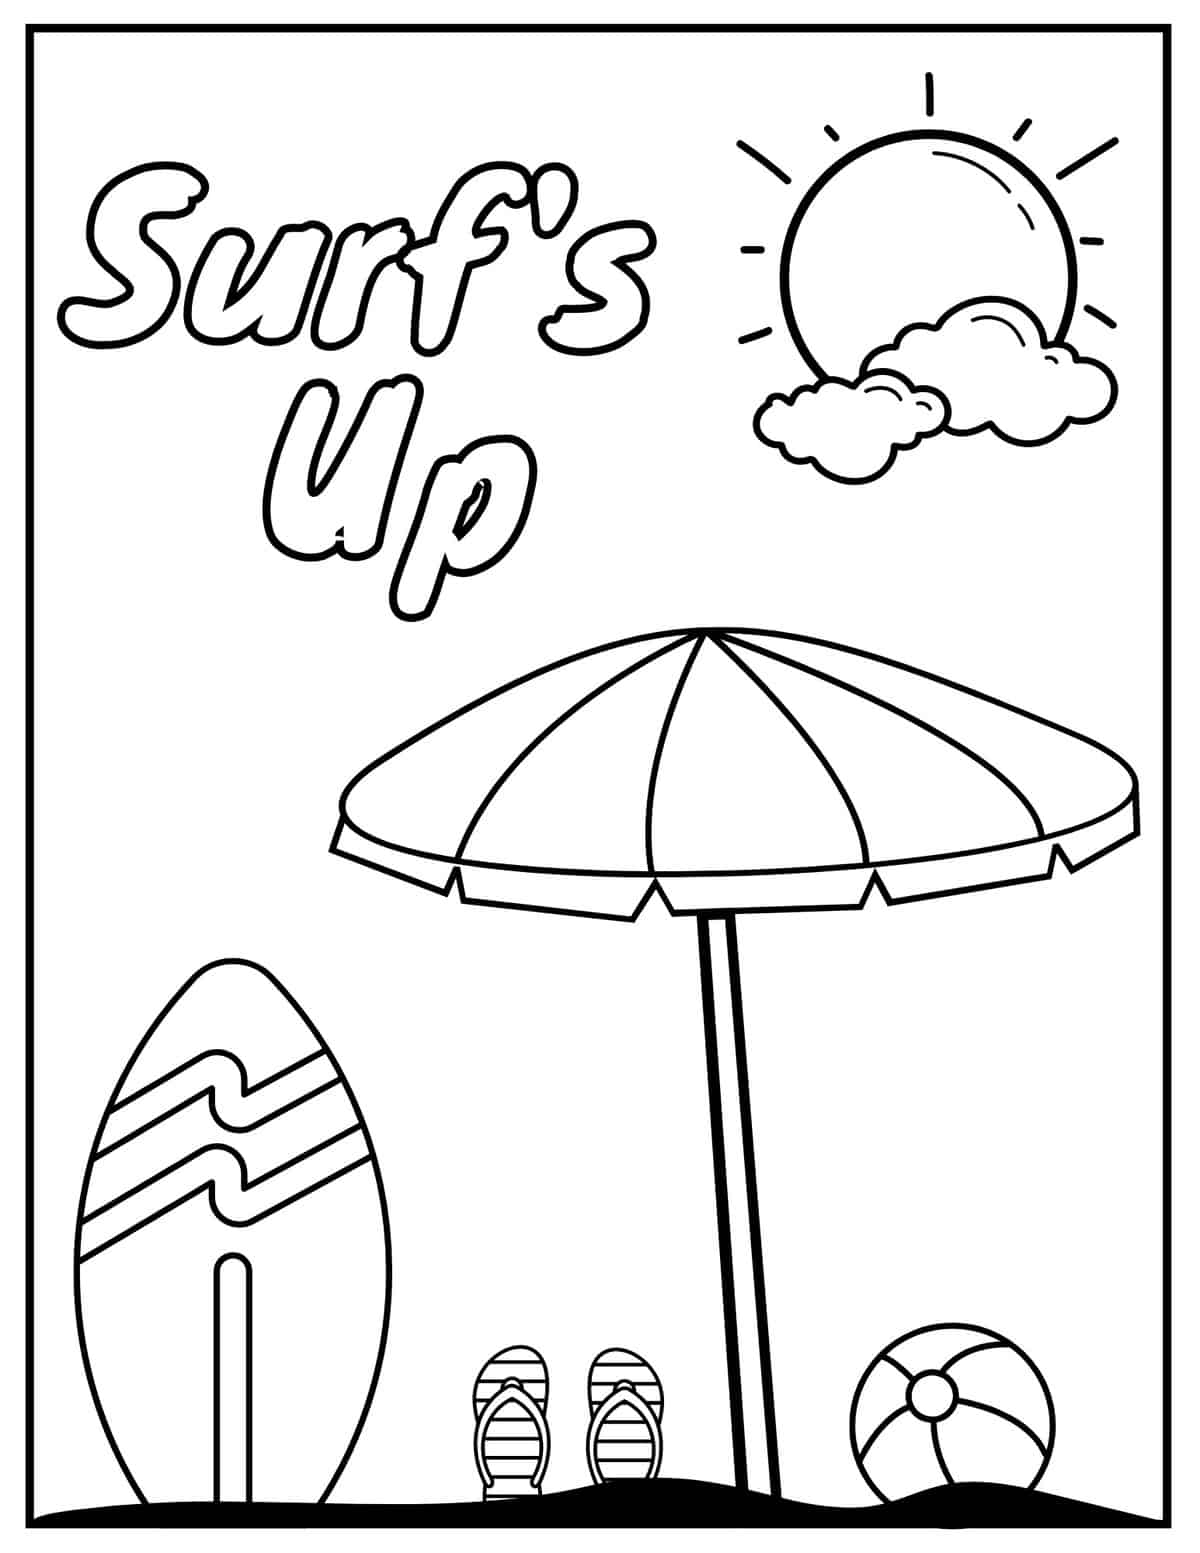 bucket filler coloring page